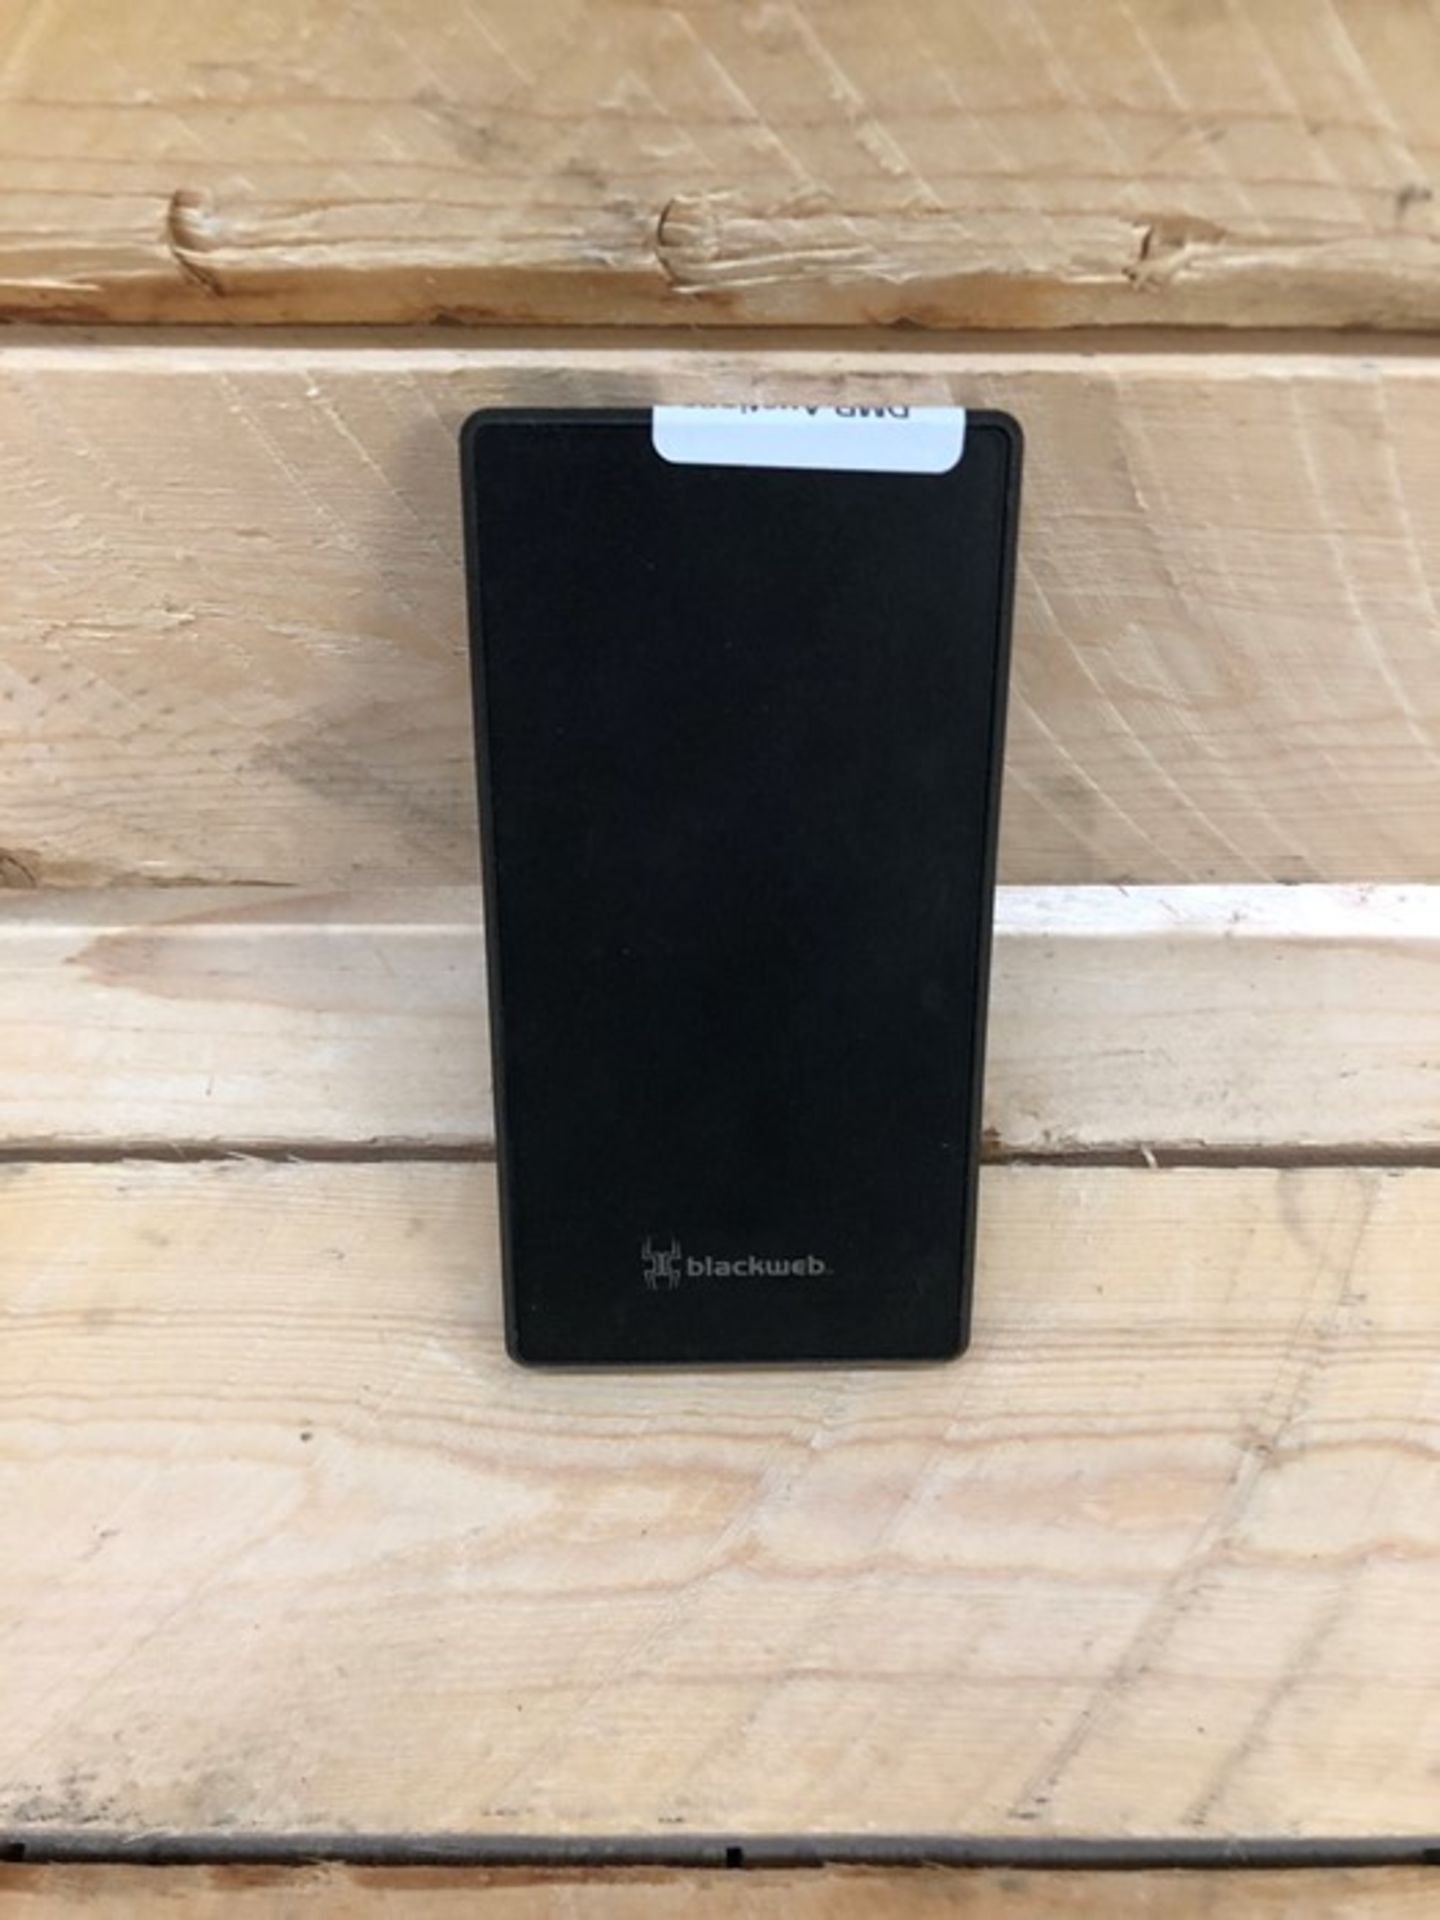 1 UNBOXED BLACKWEB 10400MAH POWER BANK IN BLACK / RRP £18.00 / BL 5630 (VIEWING HIGHLY RECOMMENDED)